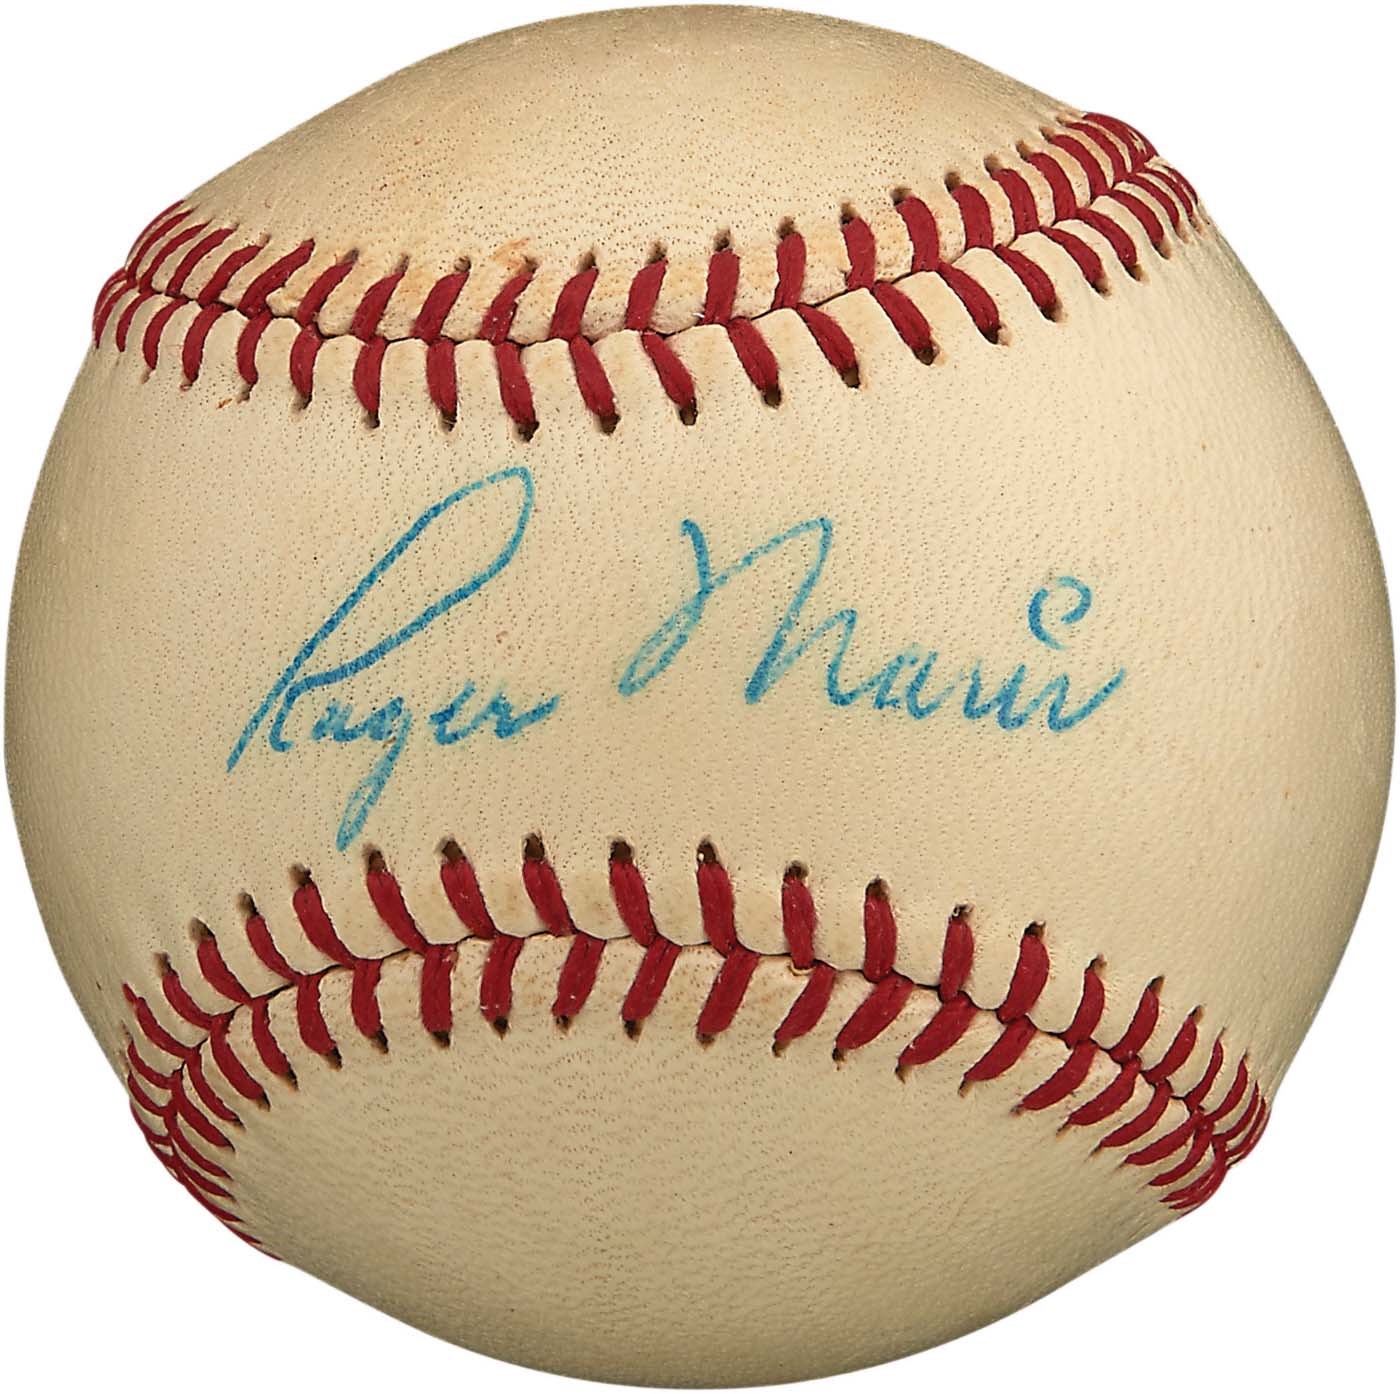 Mantle and Maris - Early 1960s Roger Maris Single-Signed Baseball (PSA NM-MT 8)